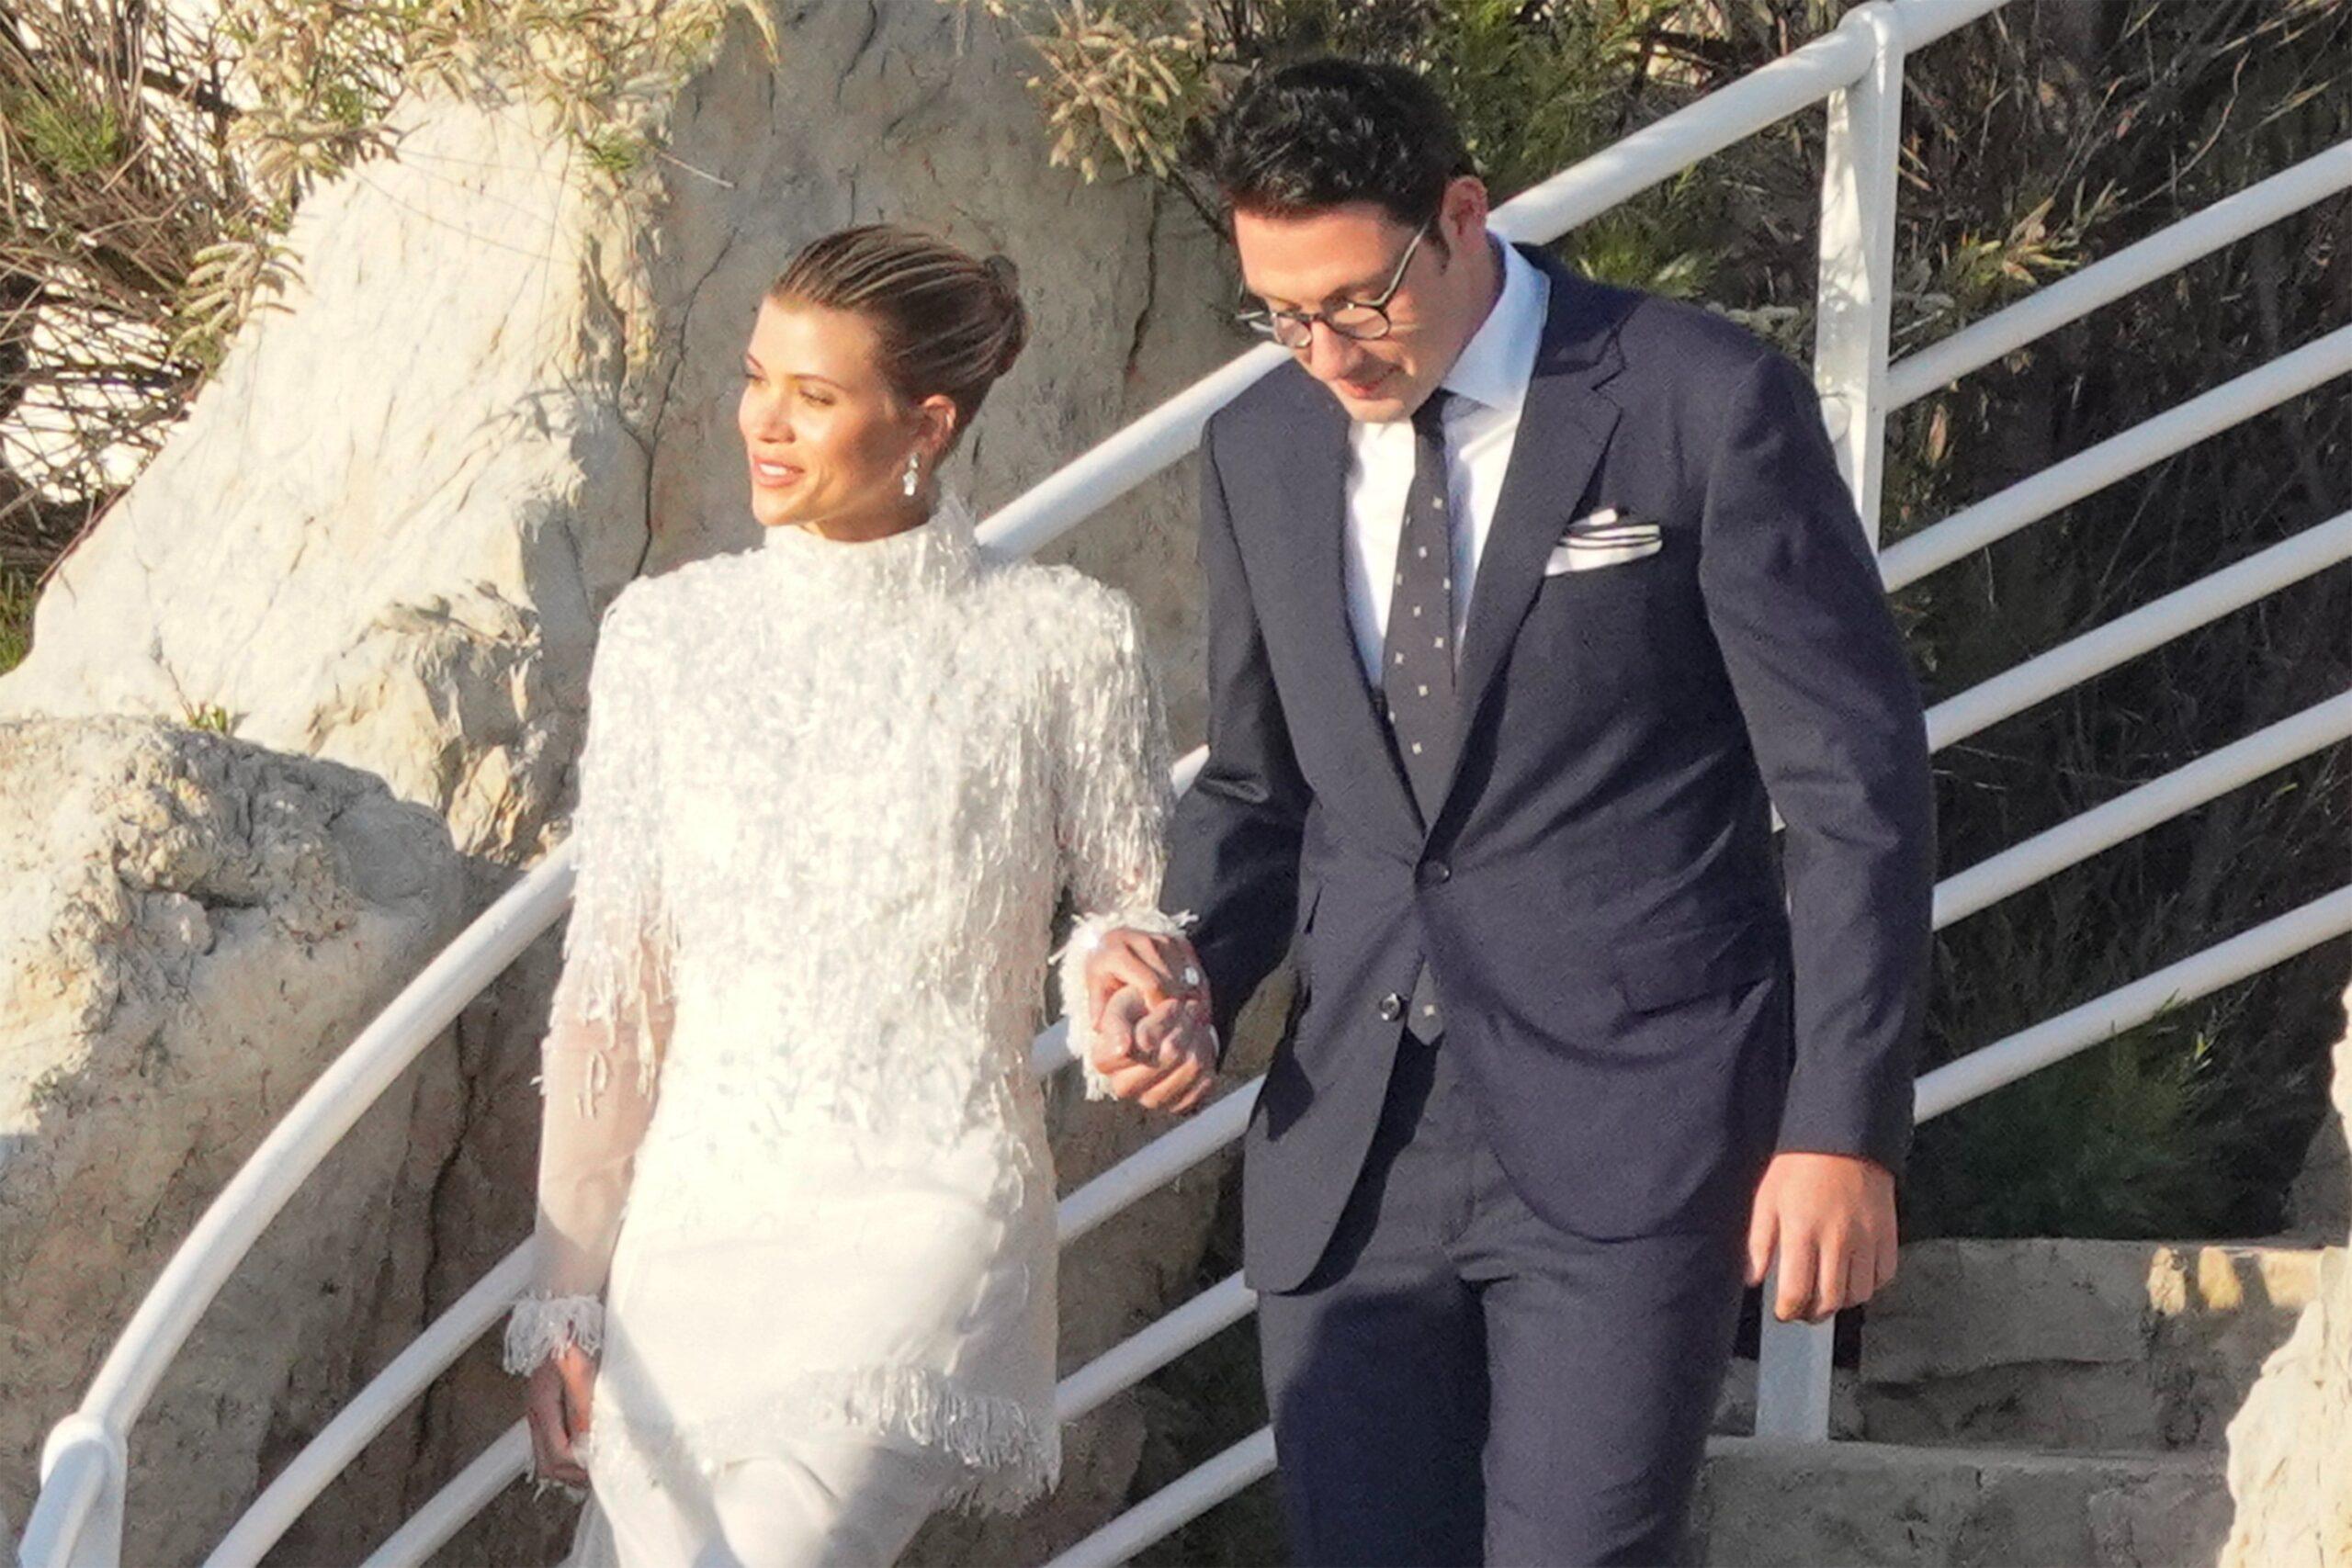 Sofia Richie And Elliot Grainge Exchange Their Vows In Beautiful Star-Studded Wedding Ceremony